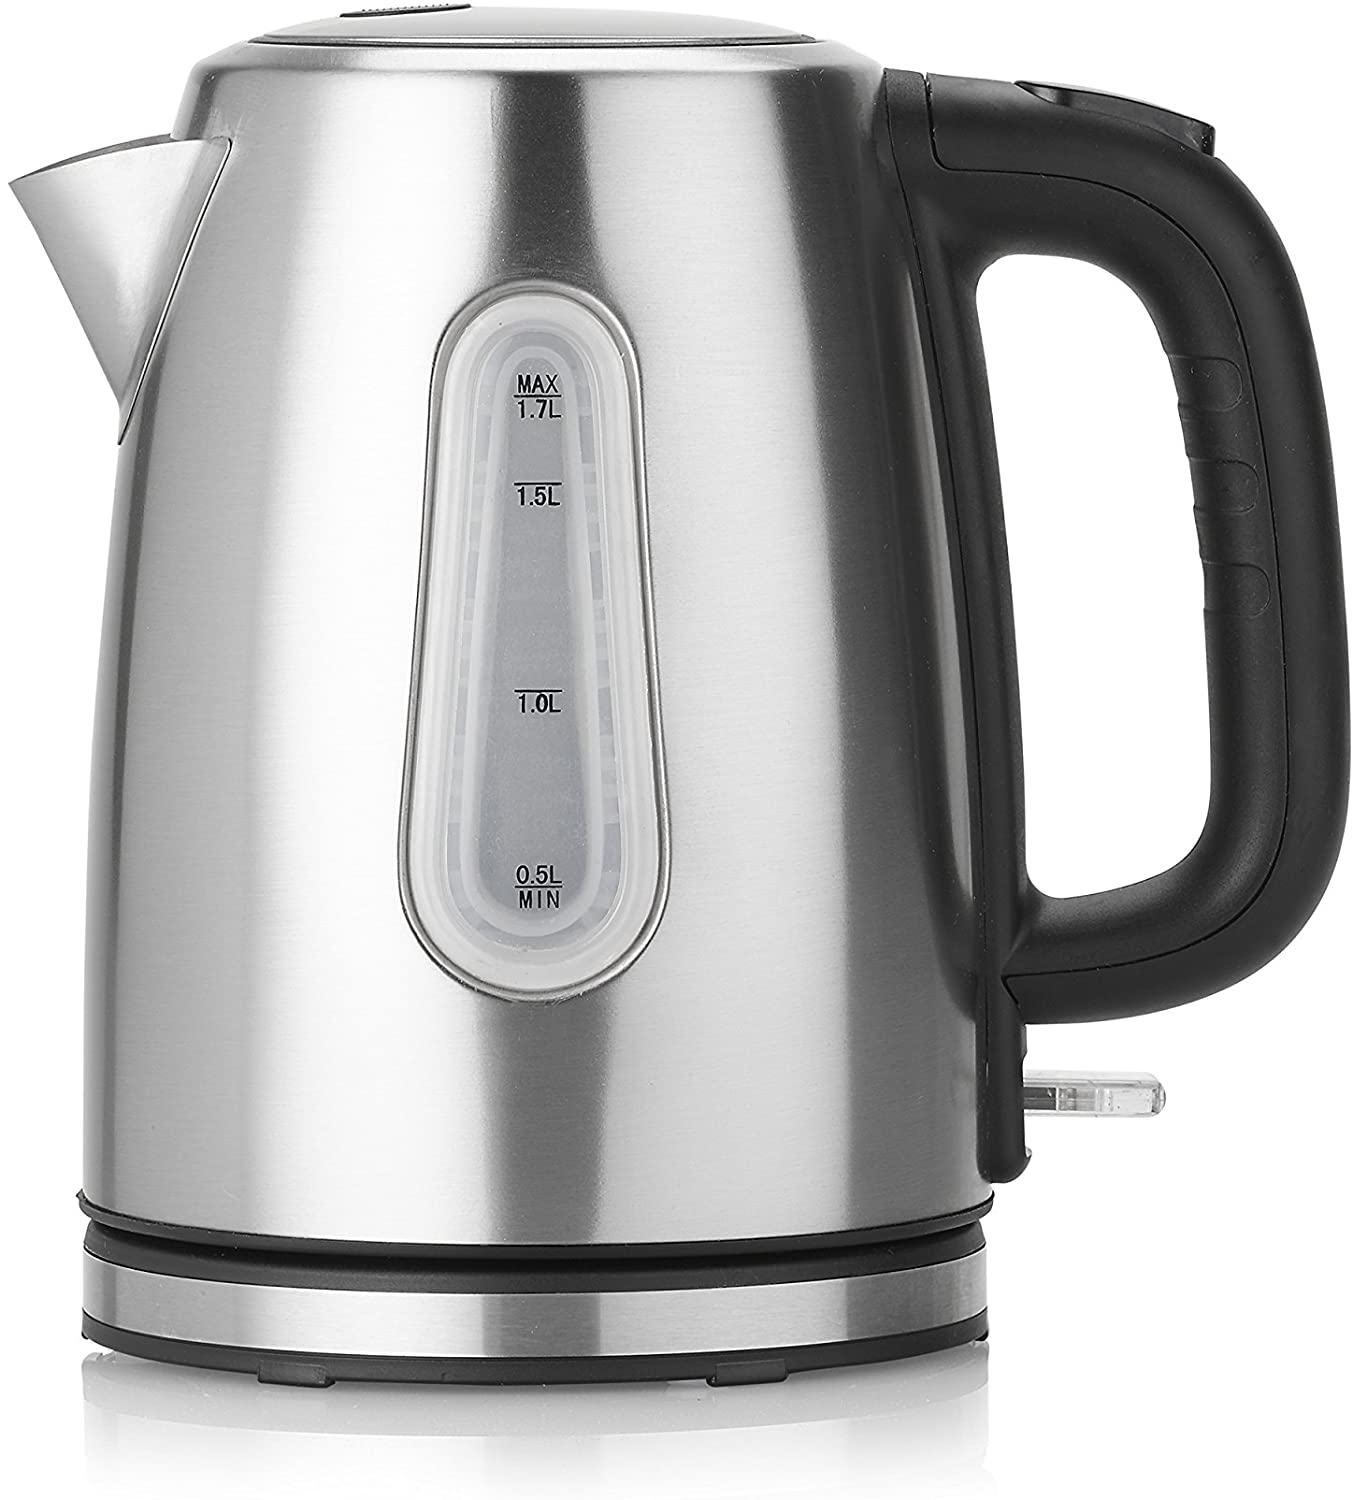 Tristar WK-3373 Kettle, Stainless Steel, Silver